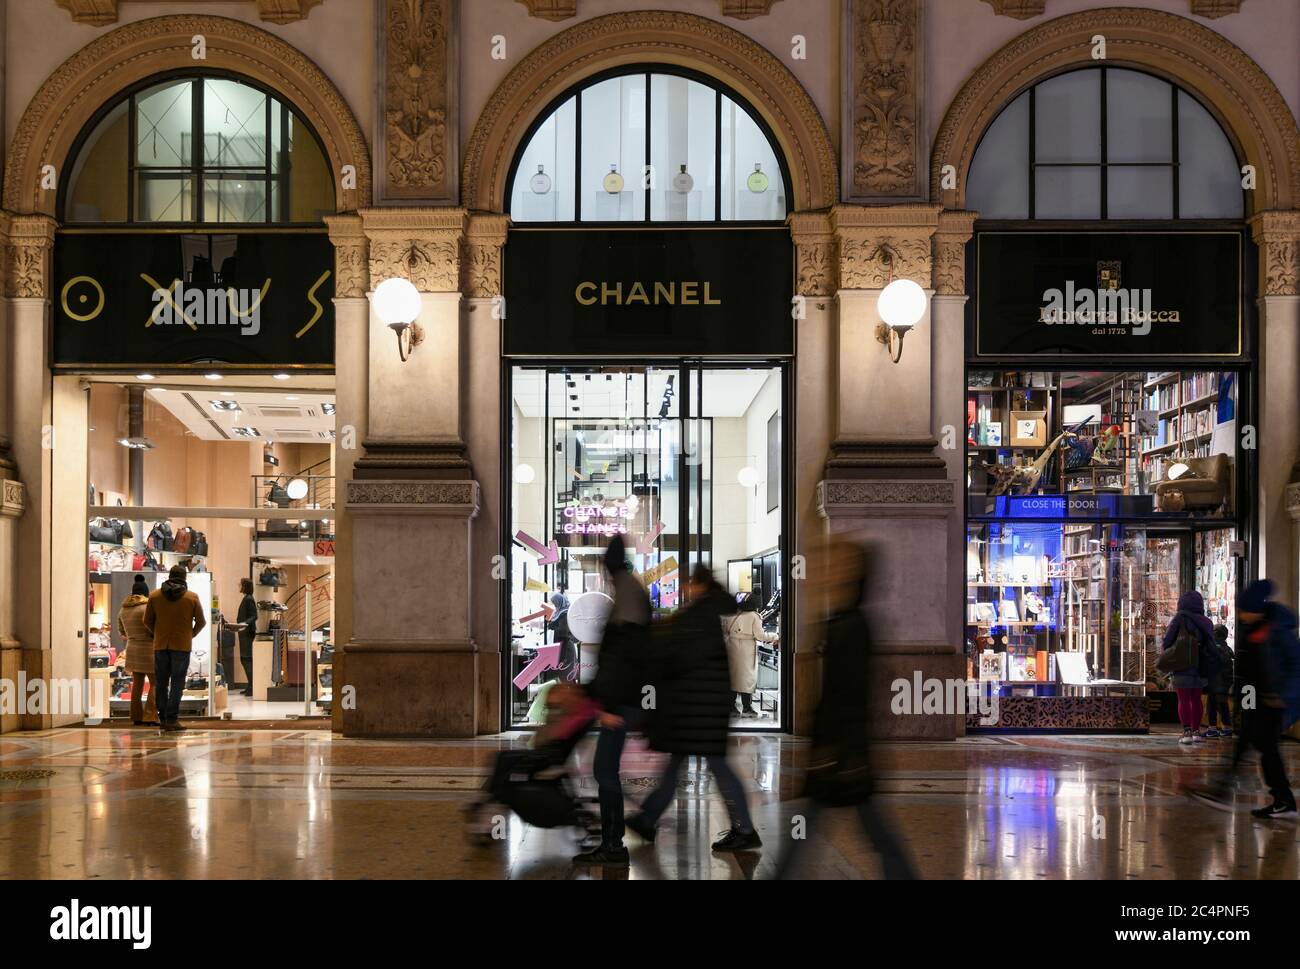 Chanel Milano High Resolution Stock Photography and Images - Alamy